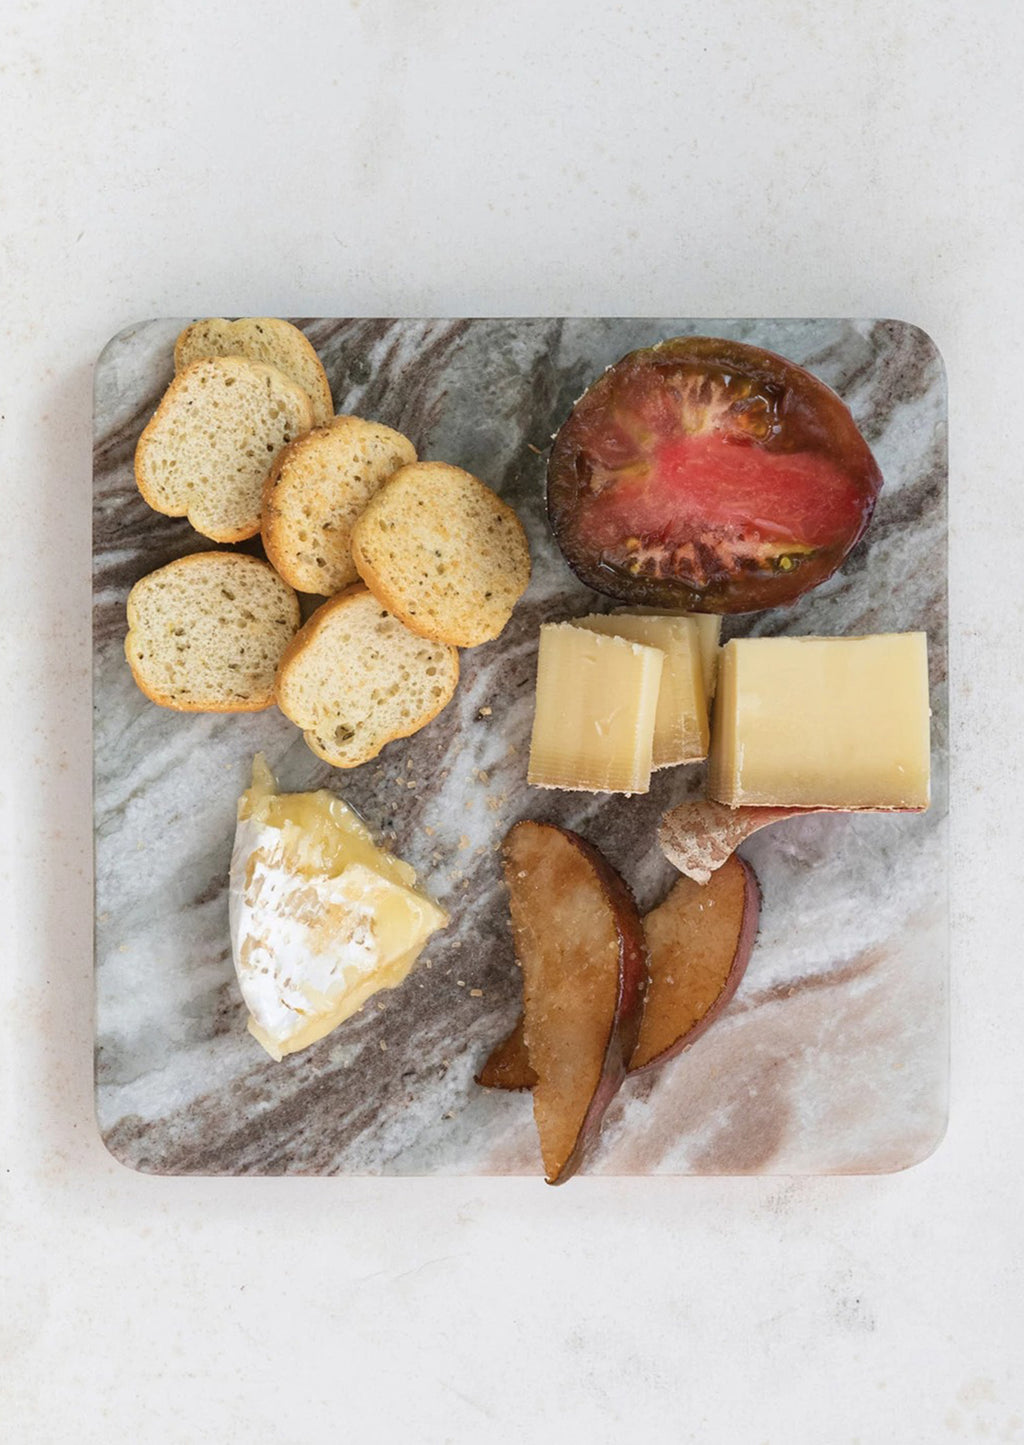 1: A marble trivet holding cheese and crackers.